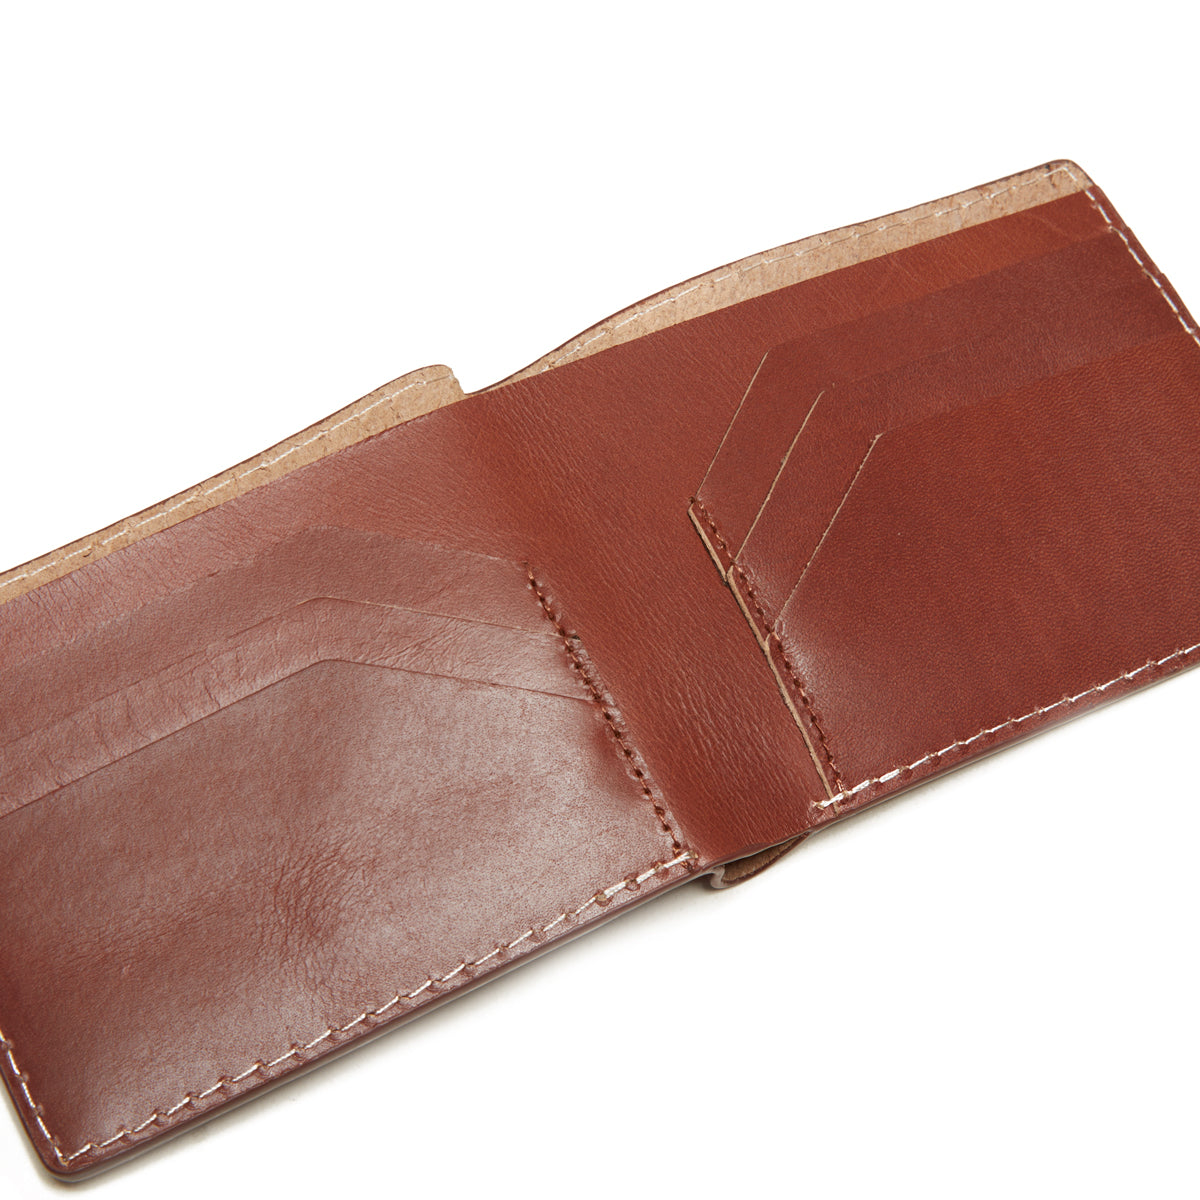 Brixton Traditional Leather Wallet - Brown image 2